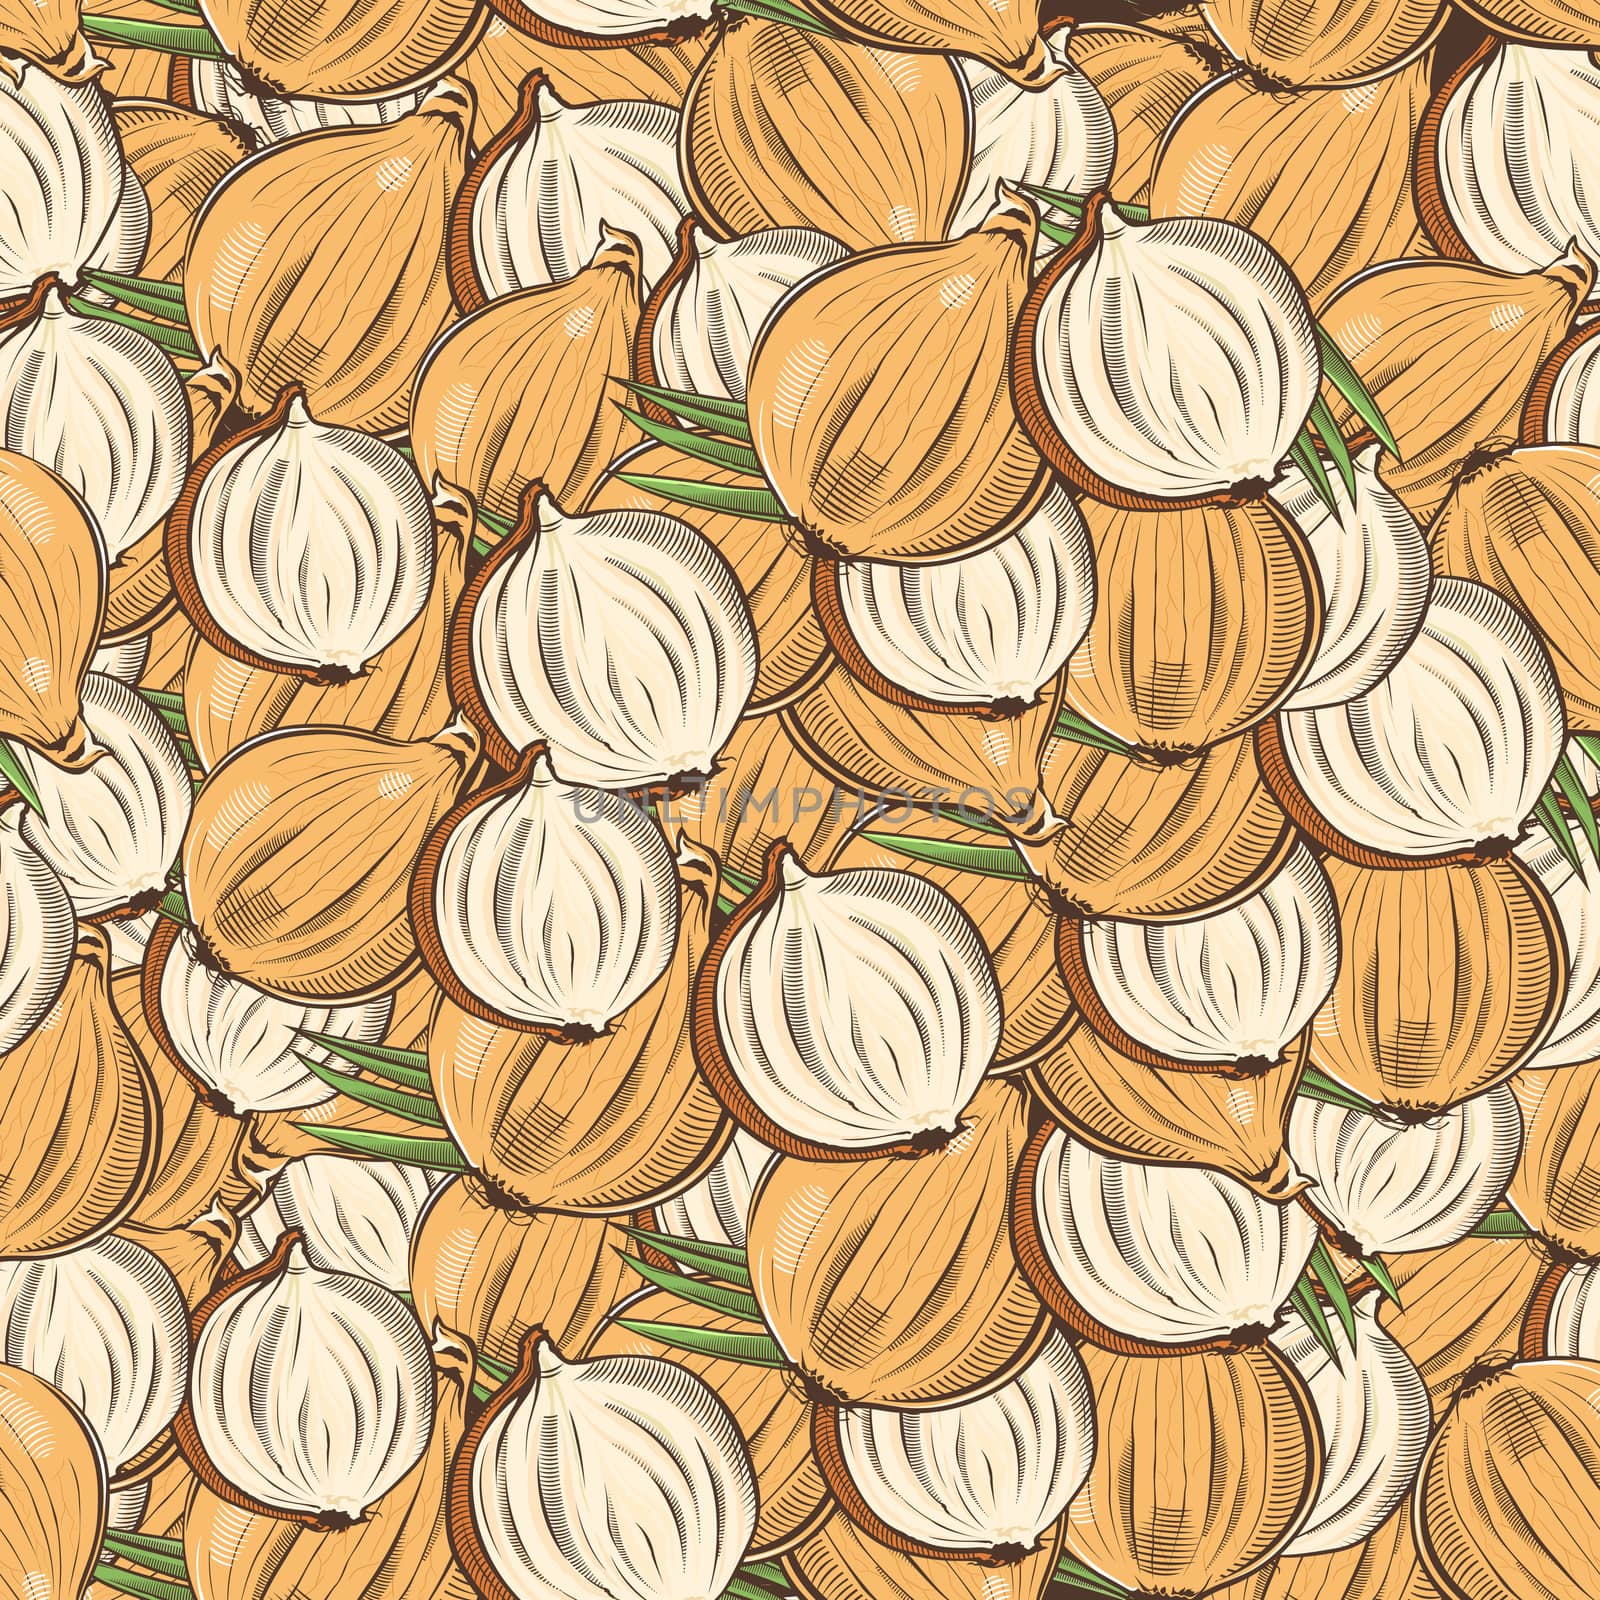 Vintage Onion Seamless Pattern by ConceptCafe